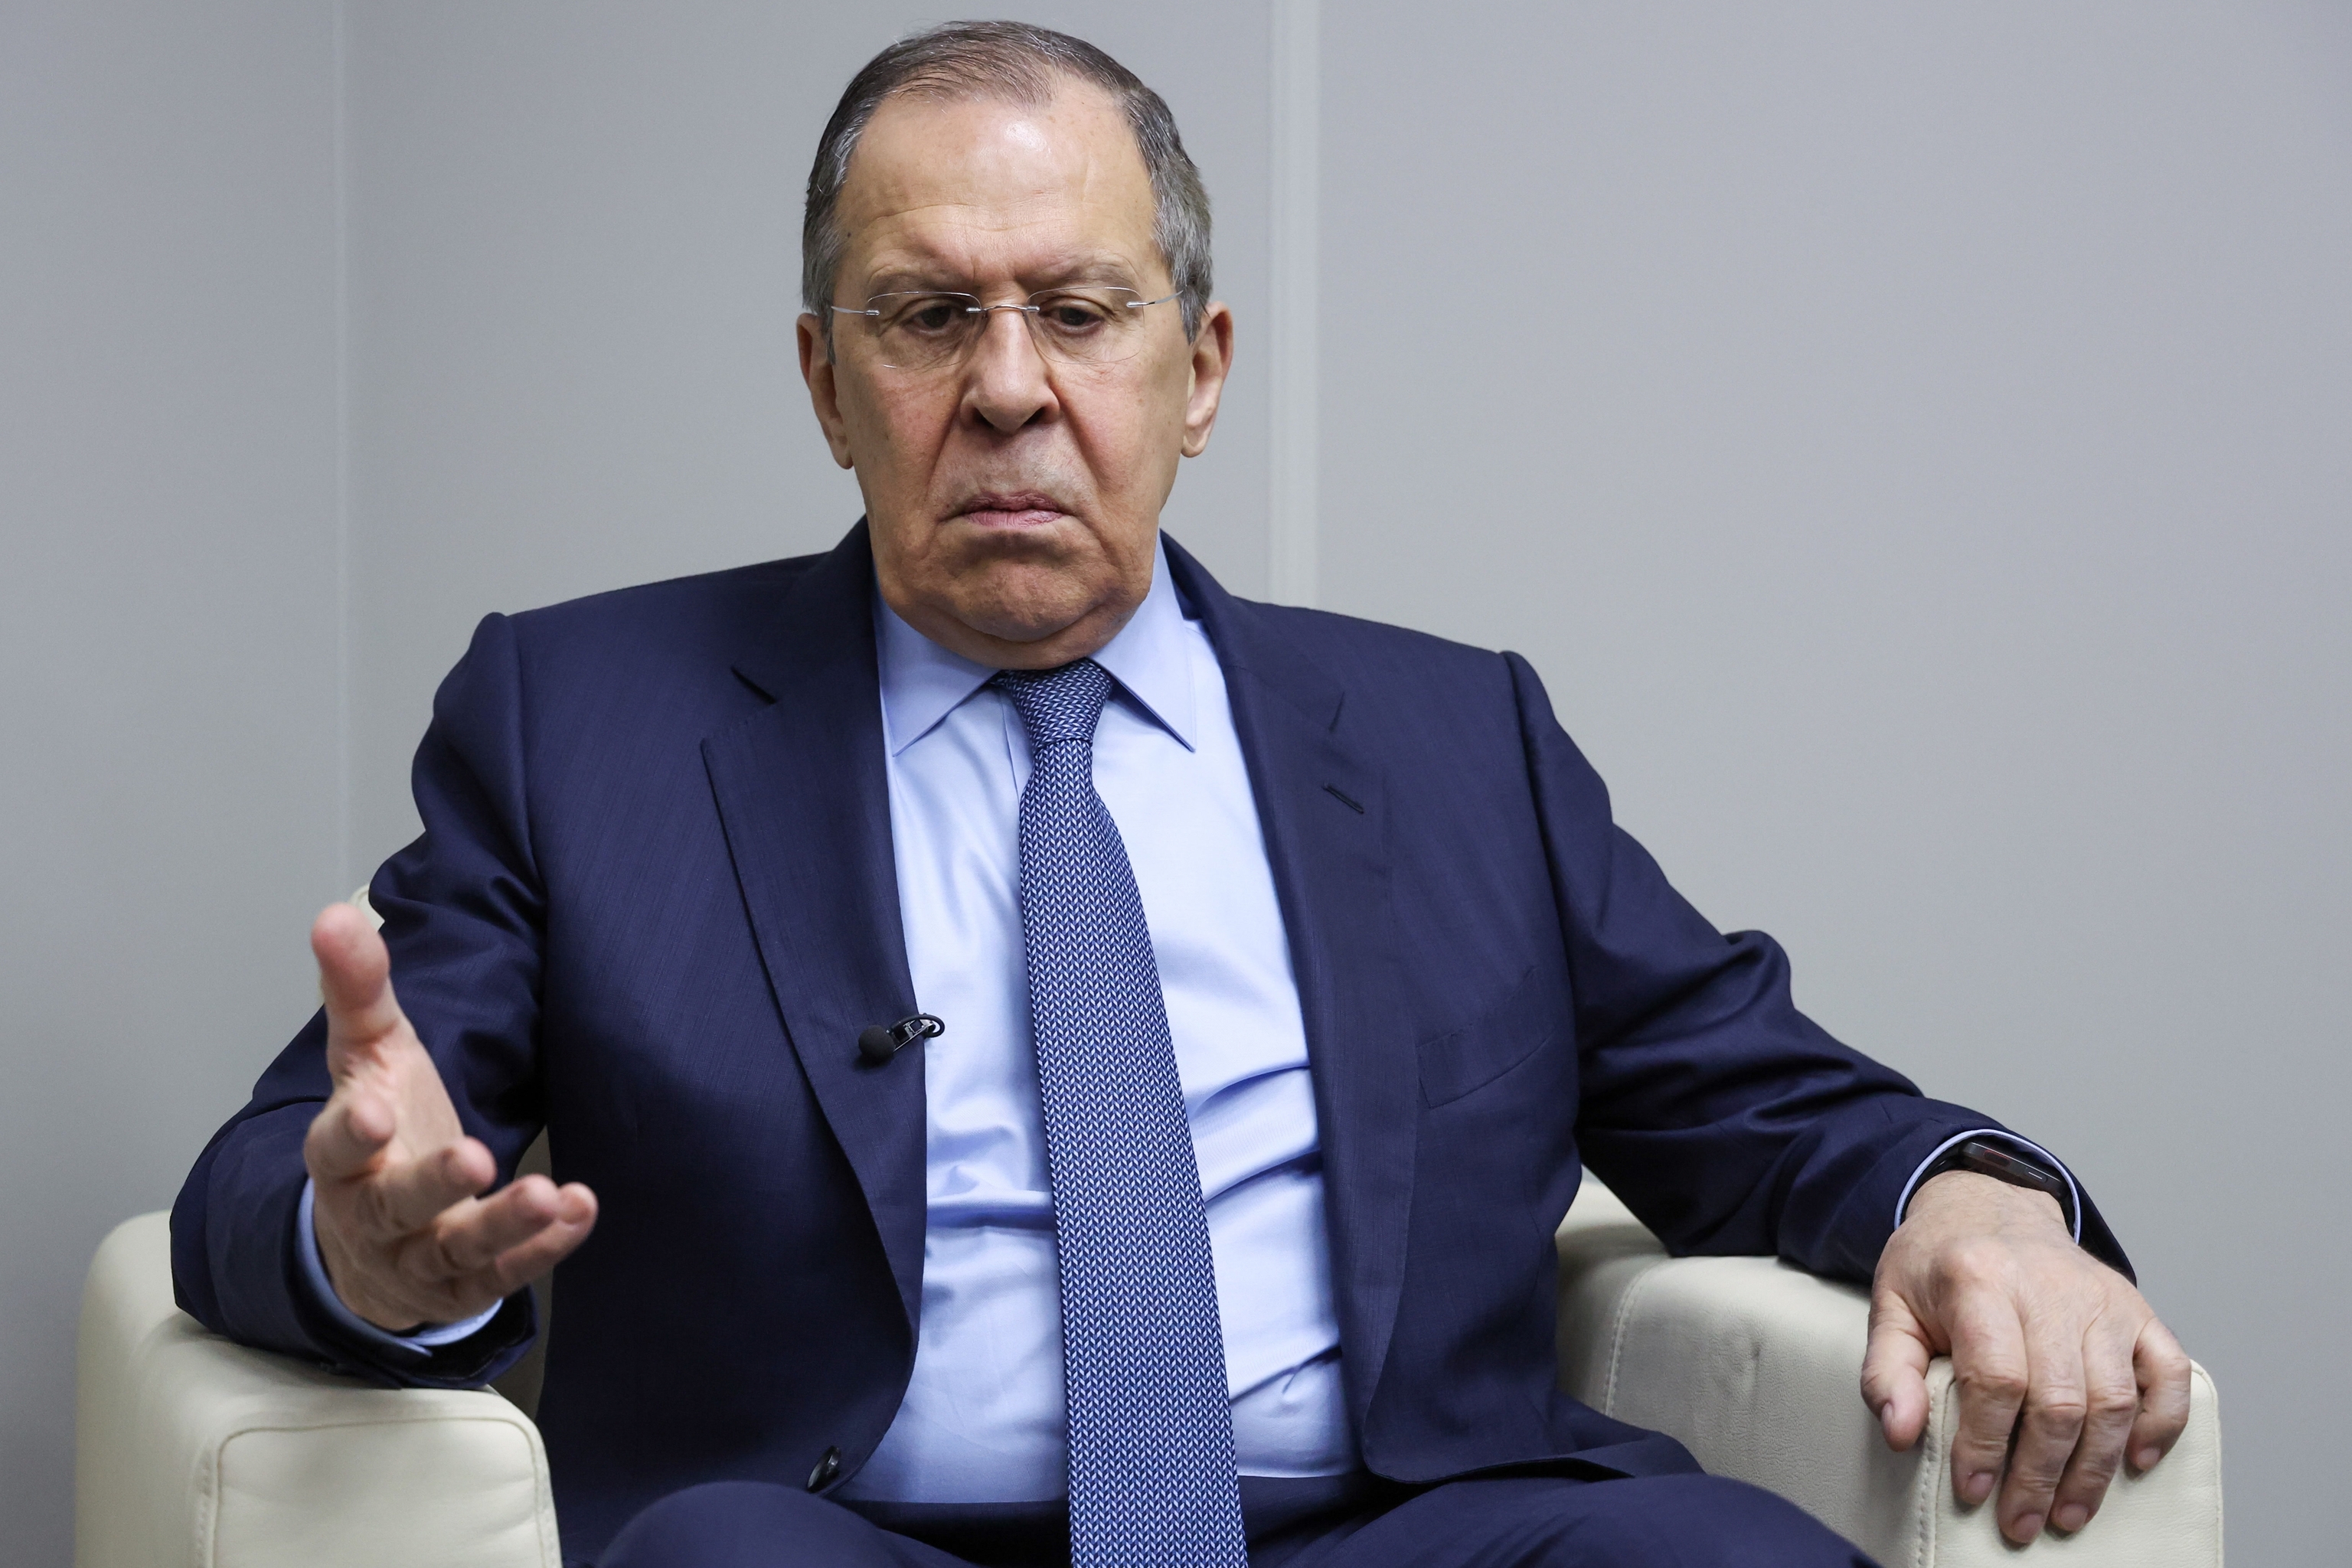 Russian Foreign Minister Sergei Lavrov at the Icon Forum